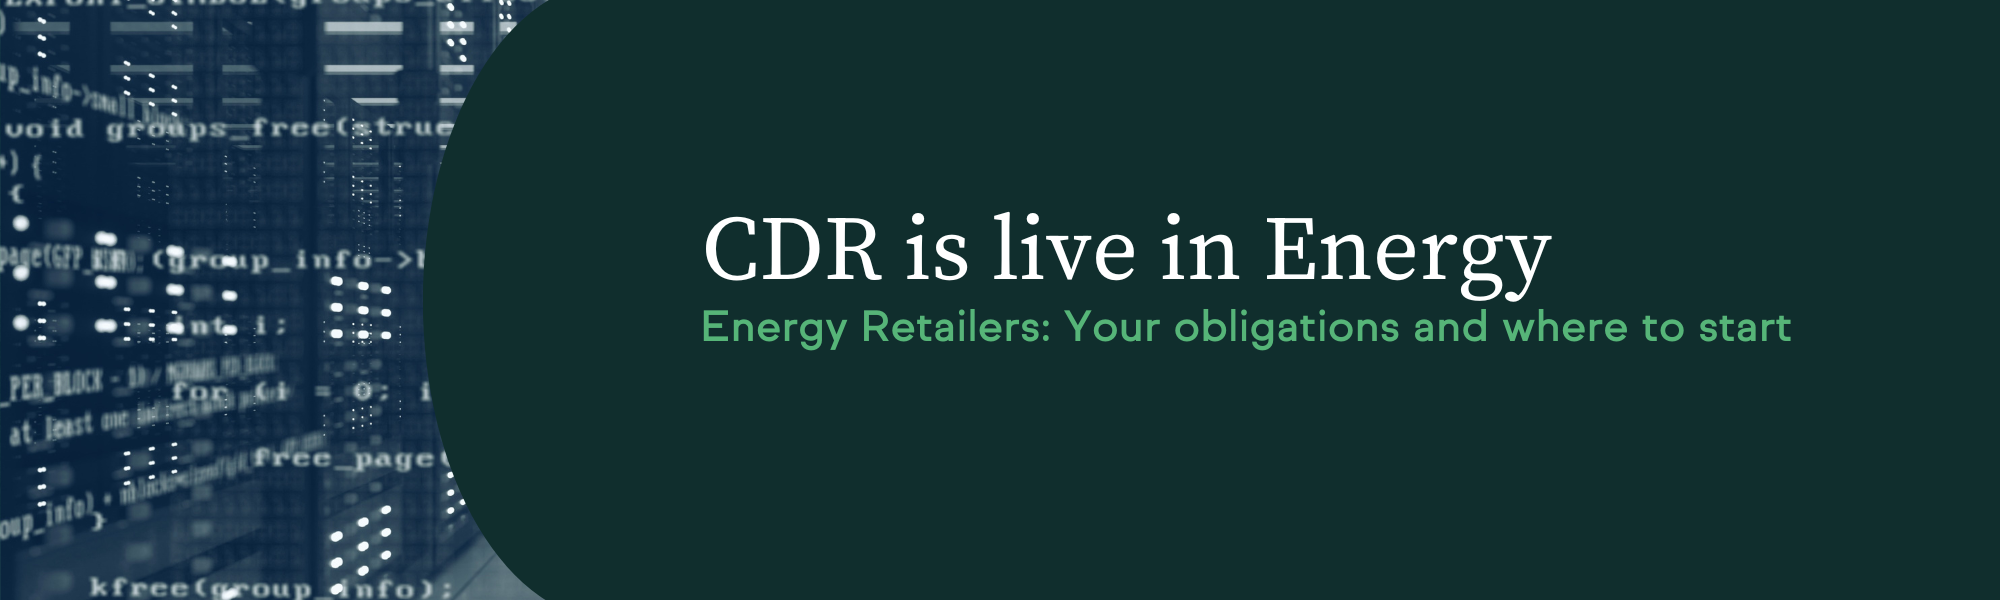 CDR obligations for energy retailers where to start